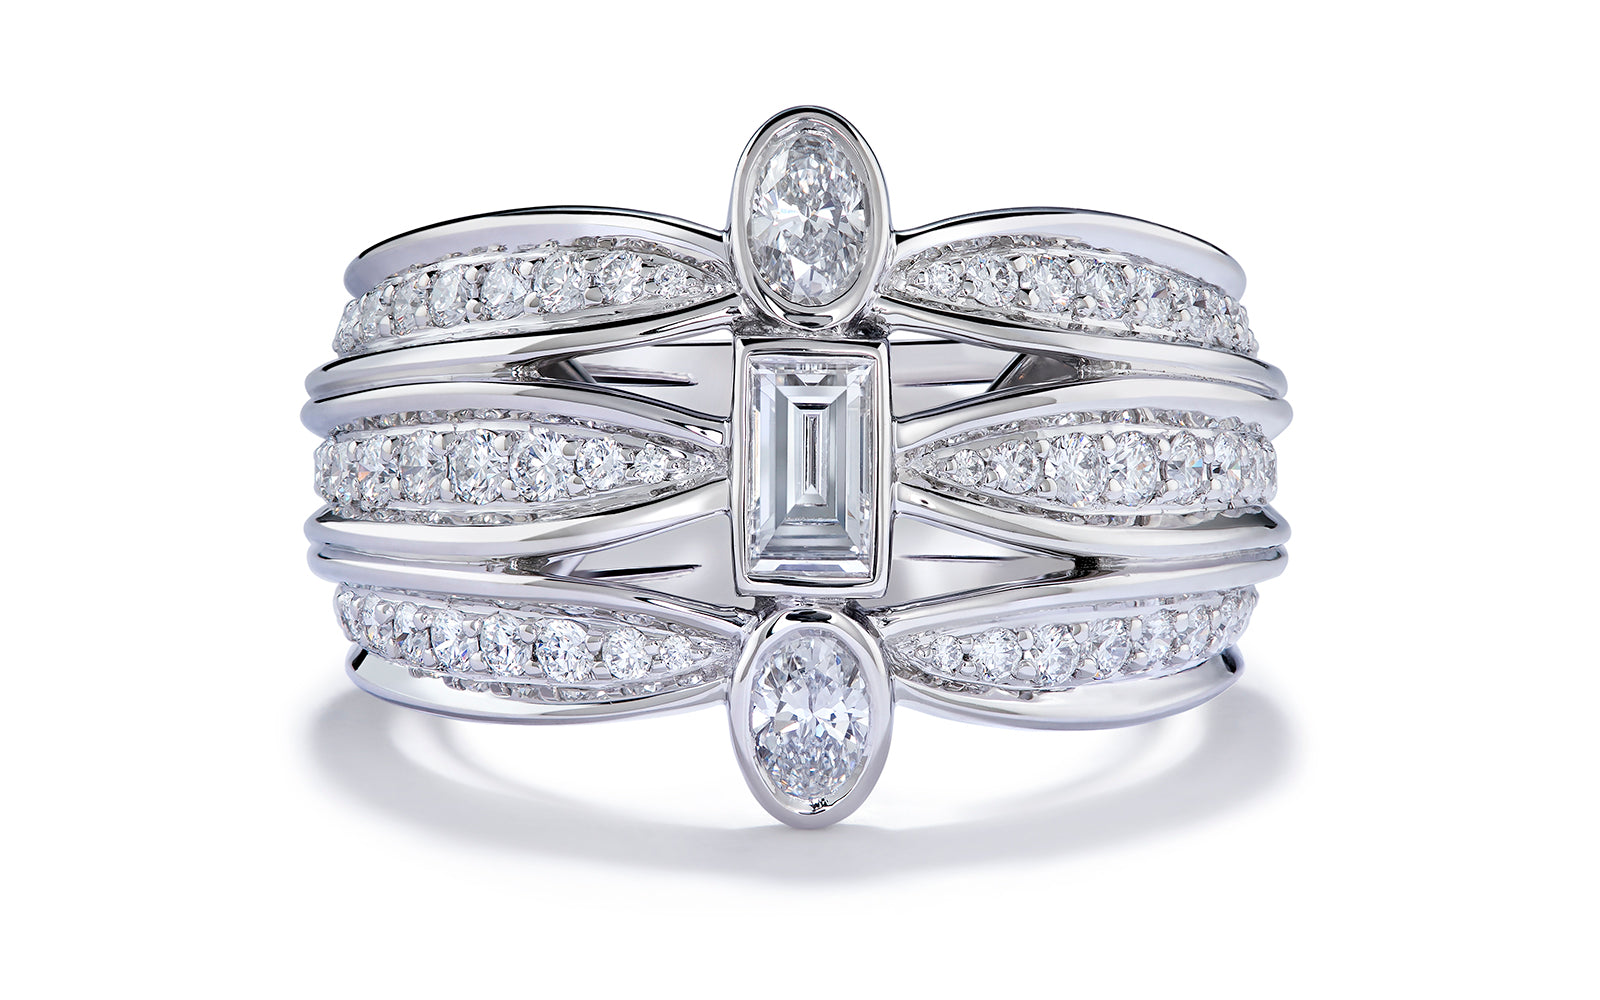 1.11ct D Flawless Diamonds Ring set in 18K White Gold